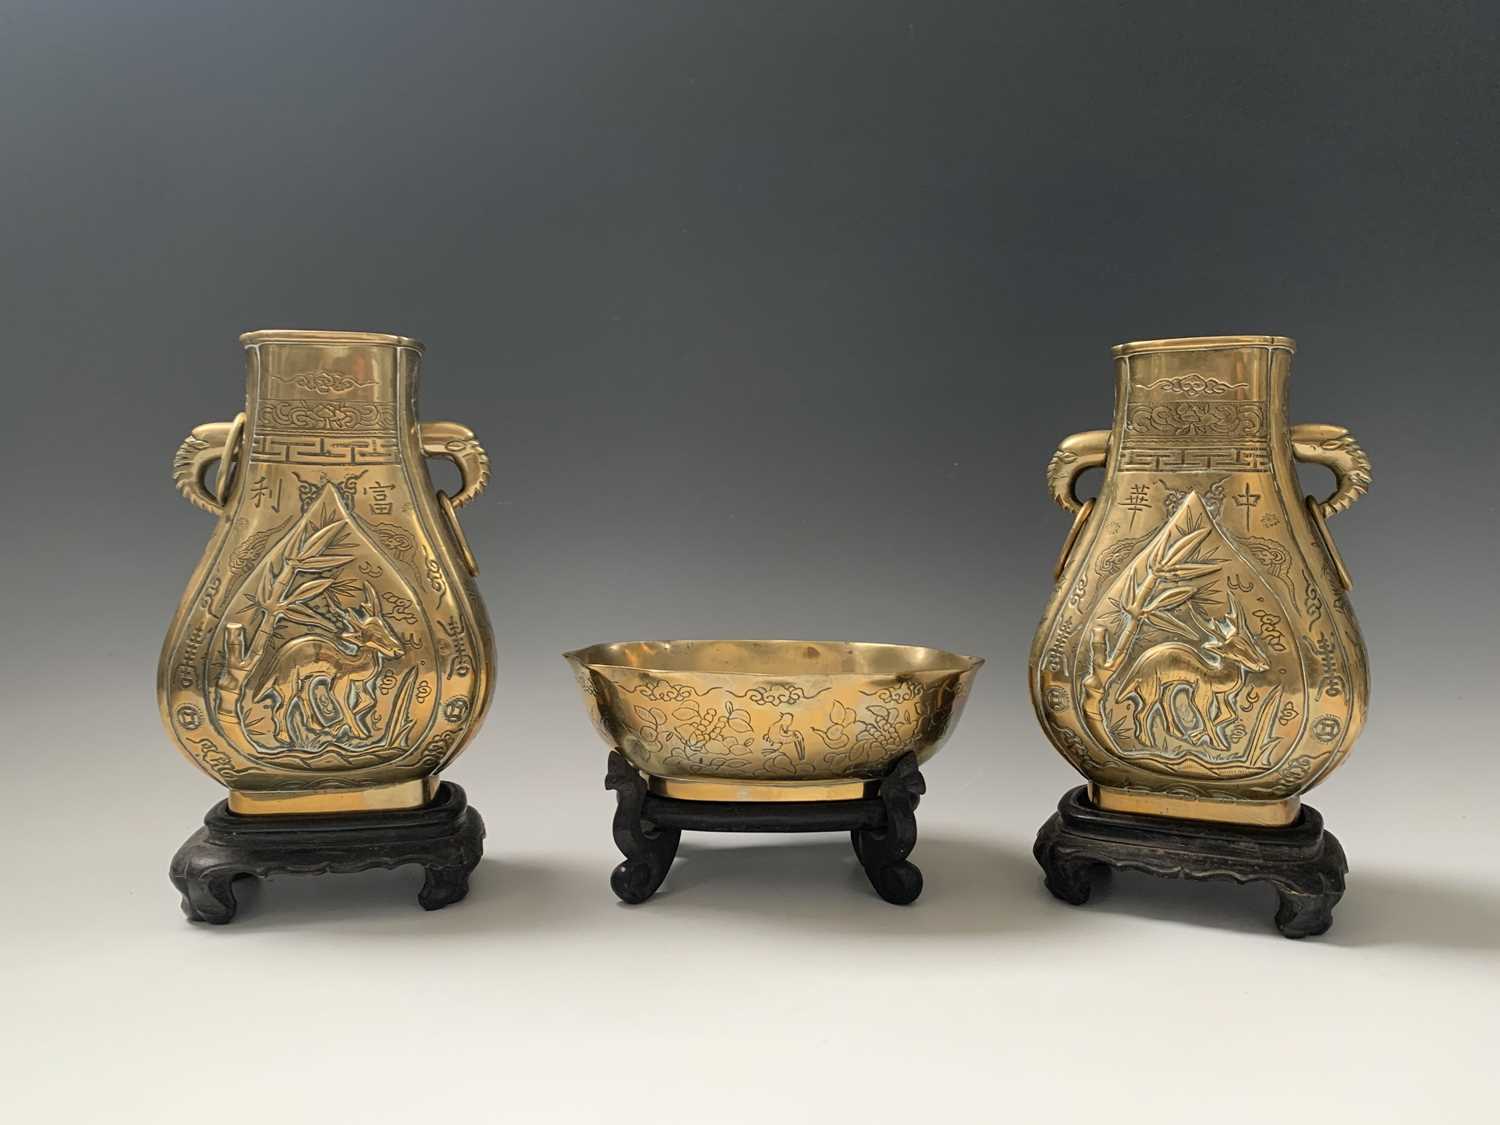 A pair of Chinese bronze pear-shaped vases, circa 1900, each with a dragon chasing the pearl to